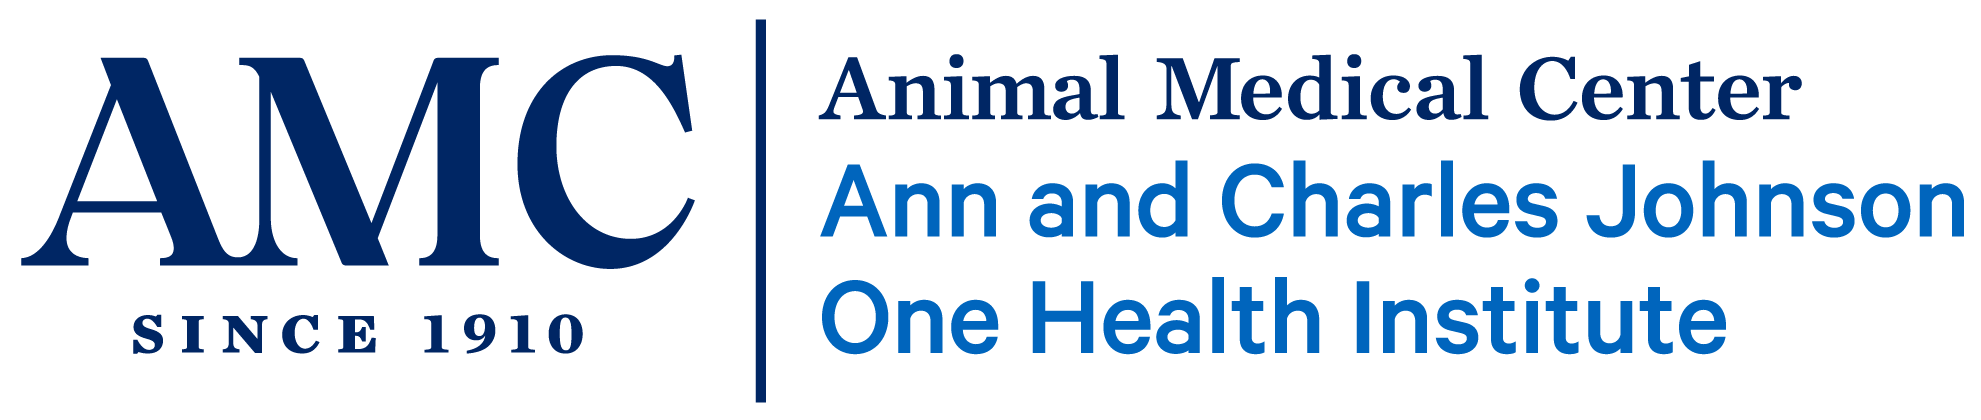 The Animal Medical Center's Ann and Charles Johnson One Health Institute logo